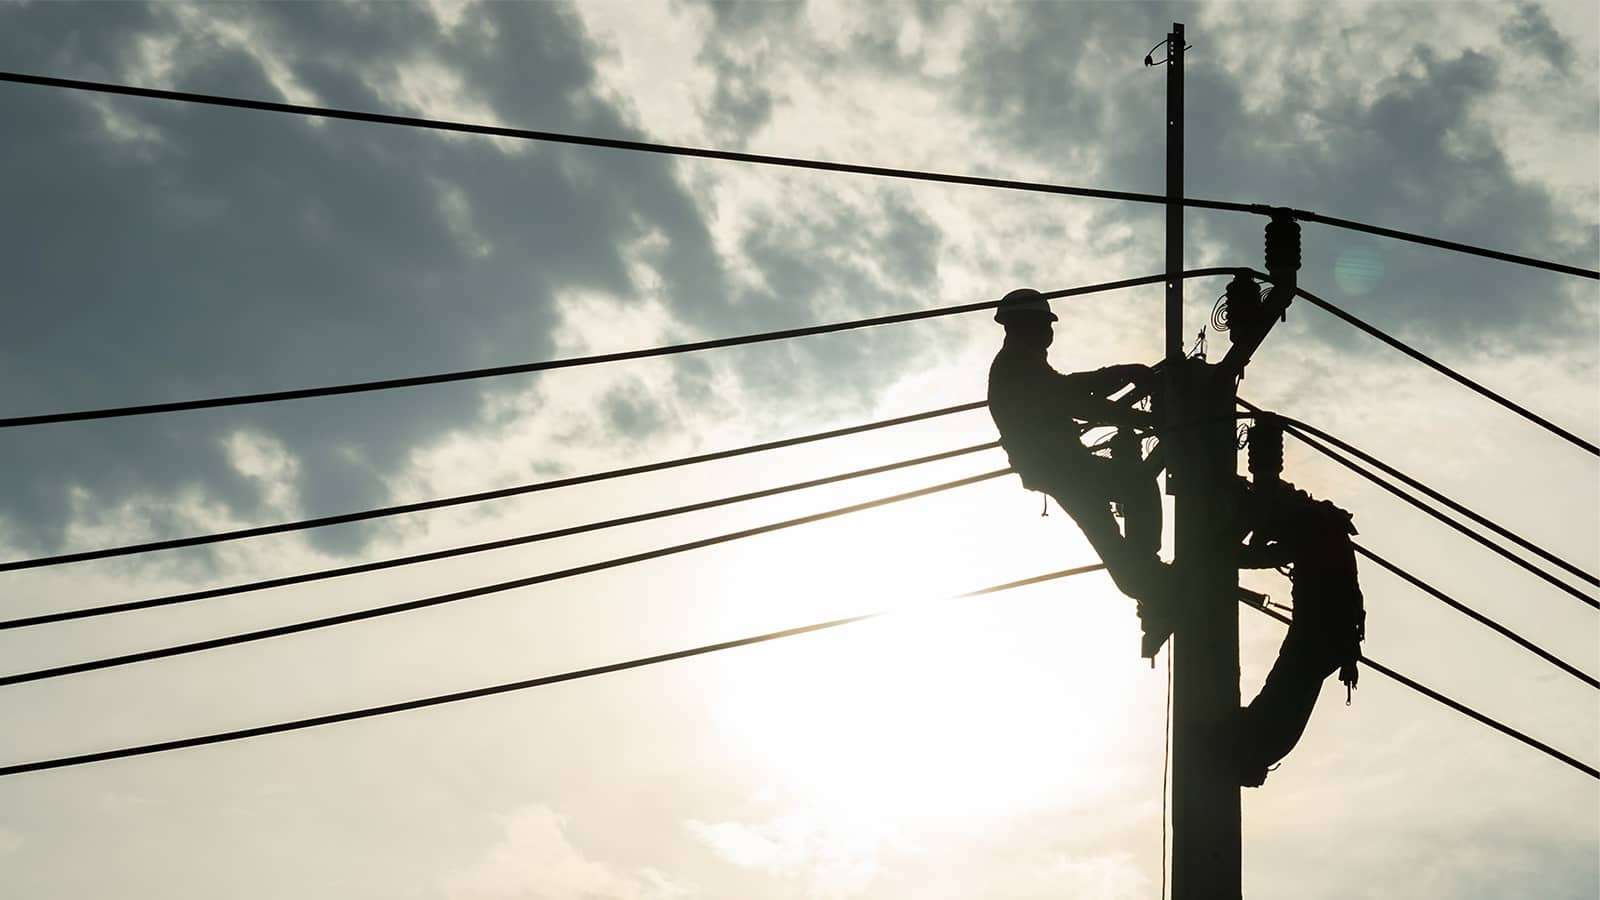 line workers on a power line pole